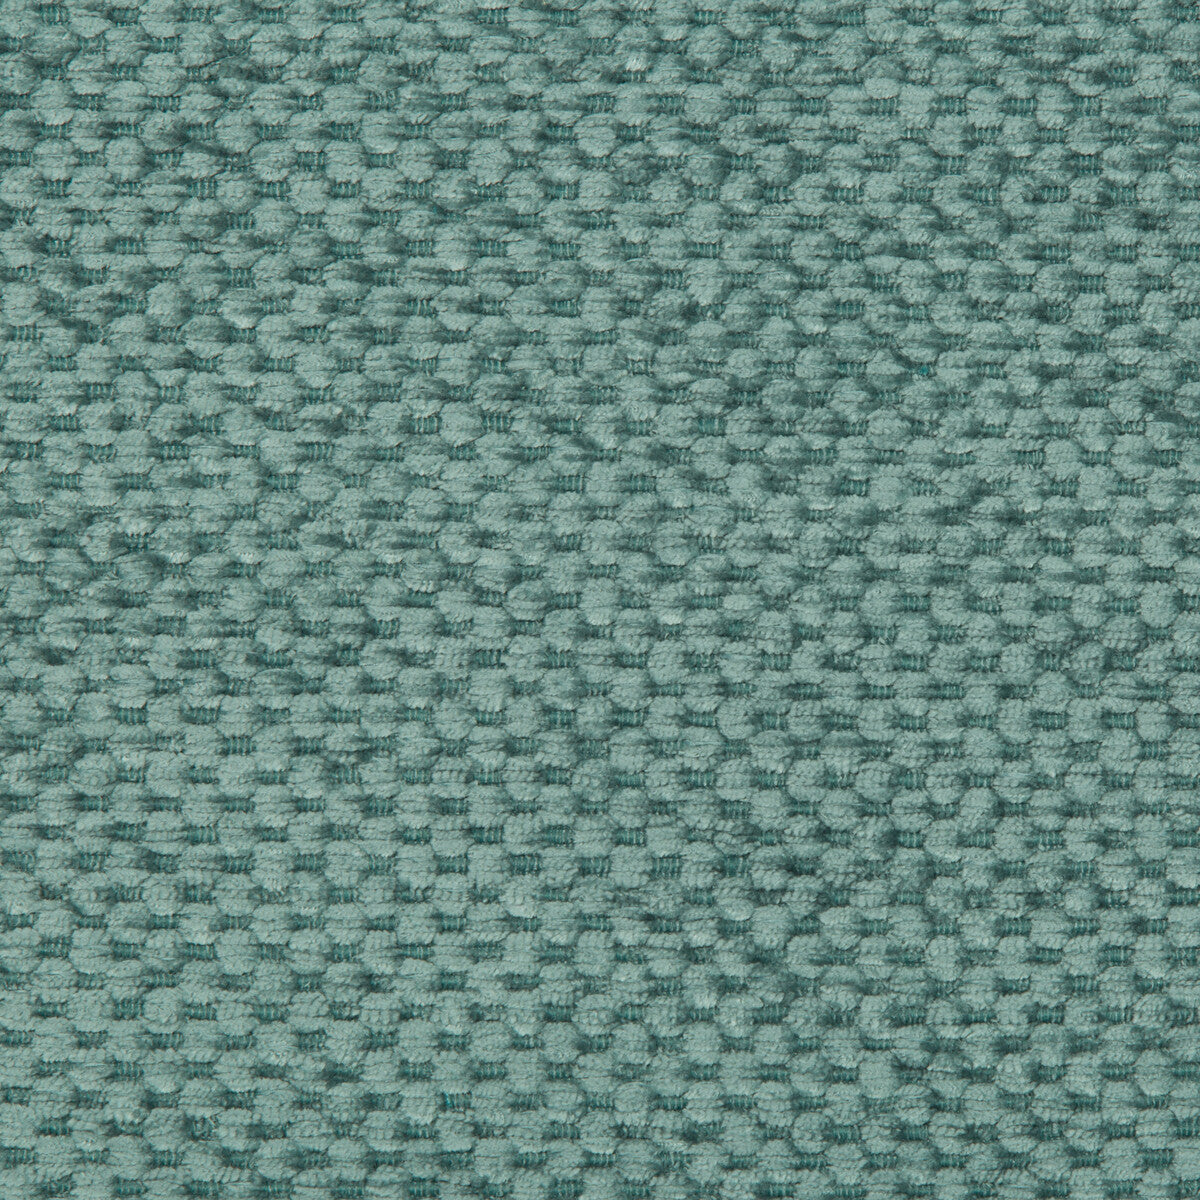 Kravet Design fabric in 35133-35 color - pattern 35133.35.0 - by Kravet Design in the Performance Crypton Home collection